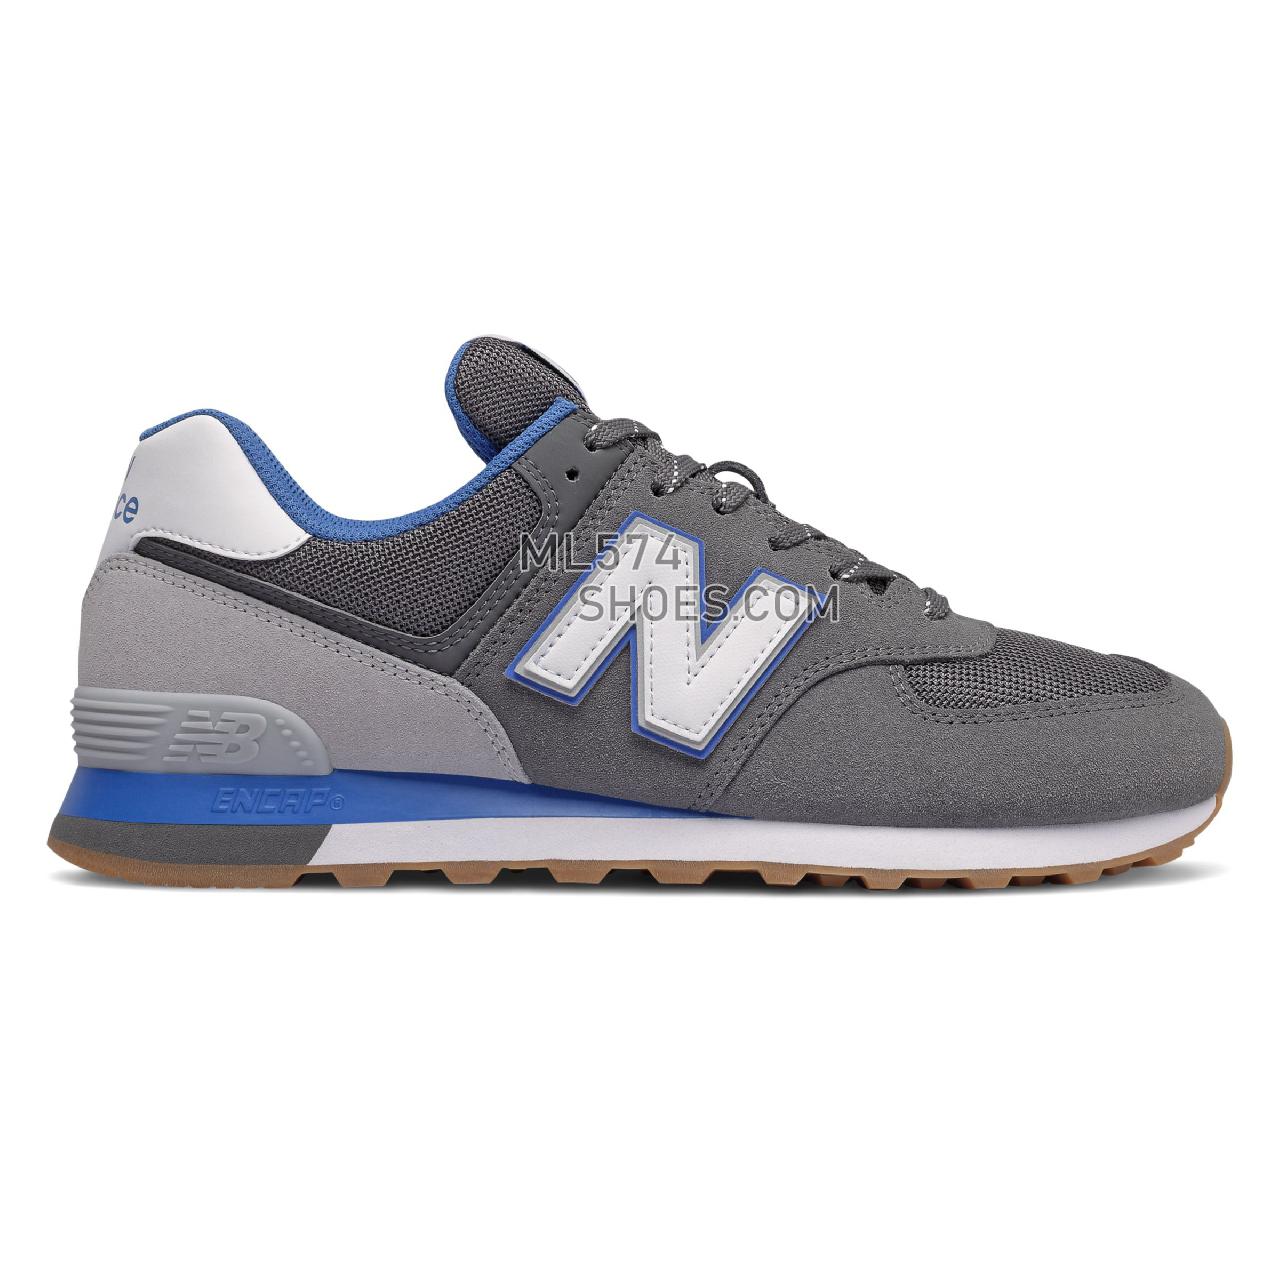 New Balance 574v2 - Men's Classic Sneakers - Lead with Faded Cobalt - ML574SKC